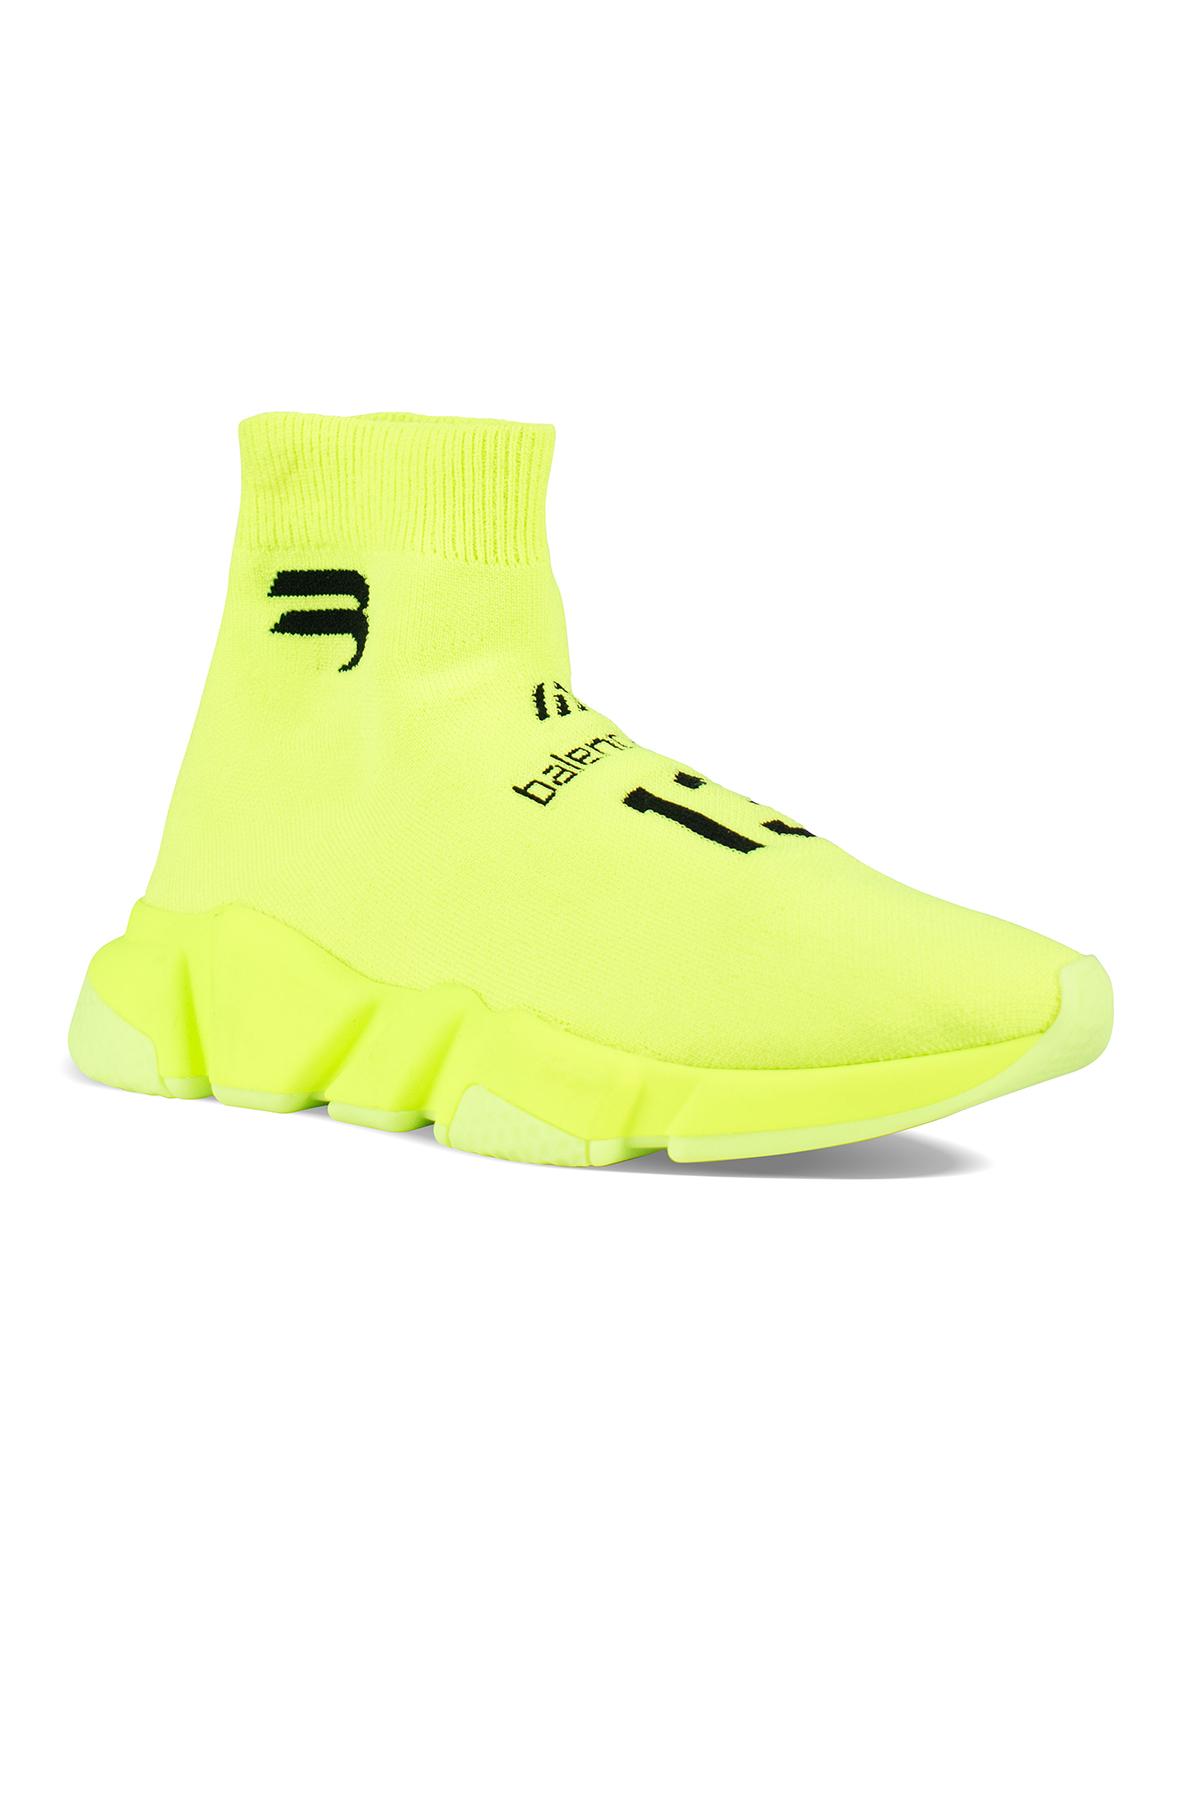 Balenciaga Speed Soccer Sneakers in Yellow | Lyst